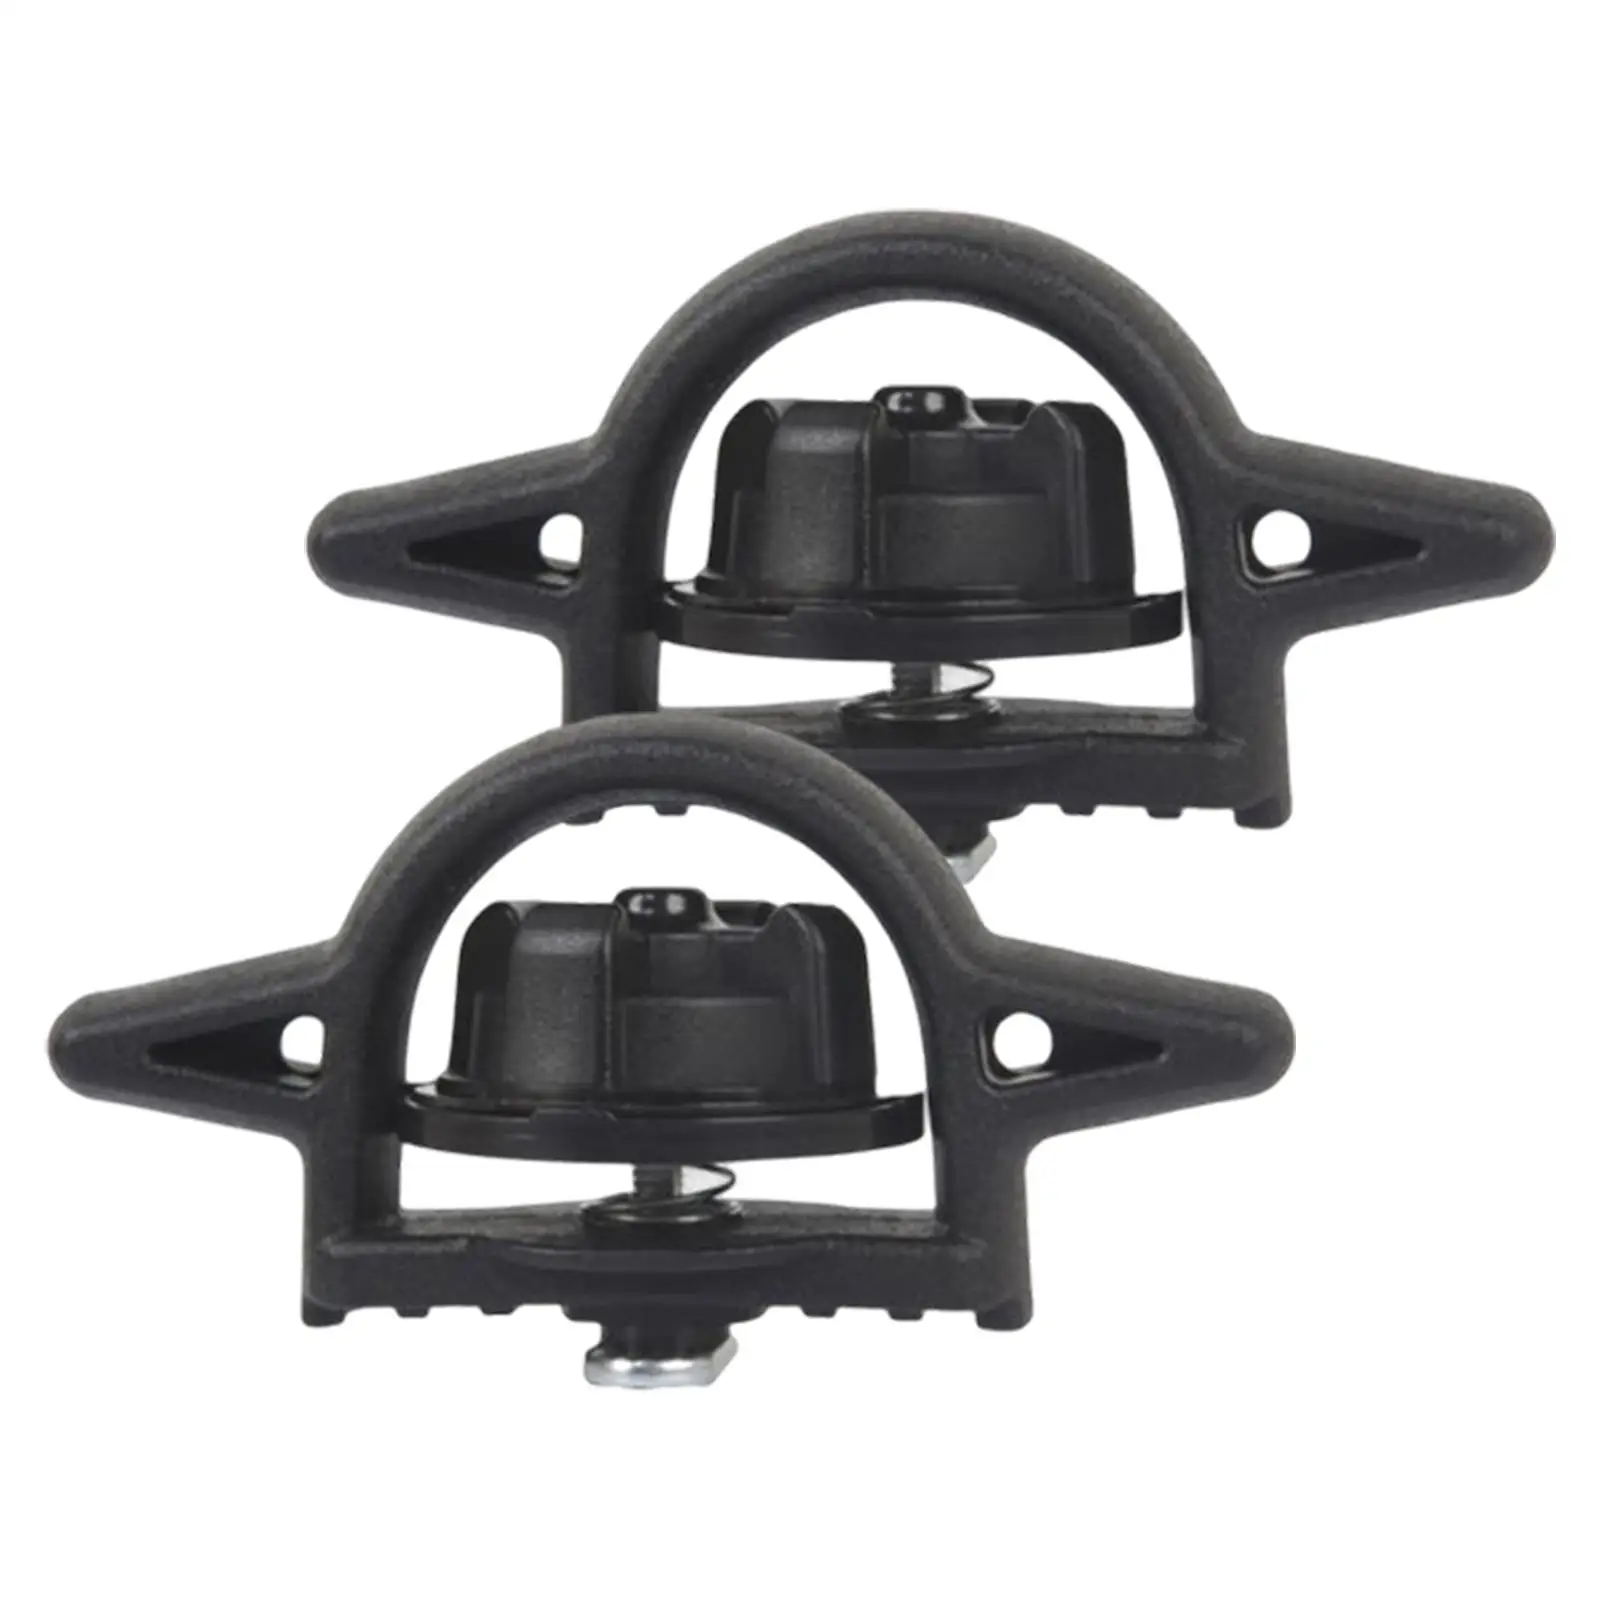 2Pcs Tie-Down Bed Cleat Black PT278-35112 Car Accessories for 